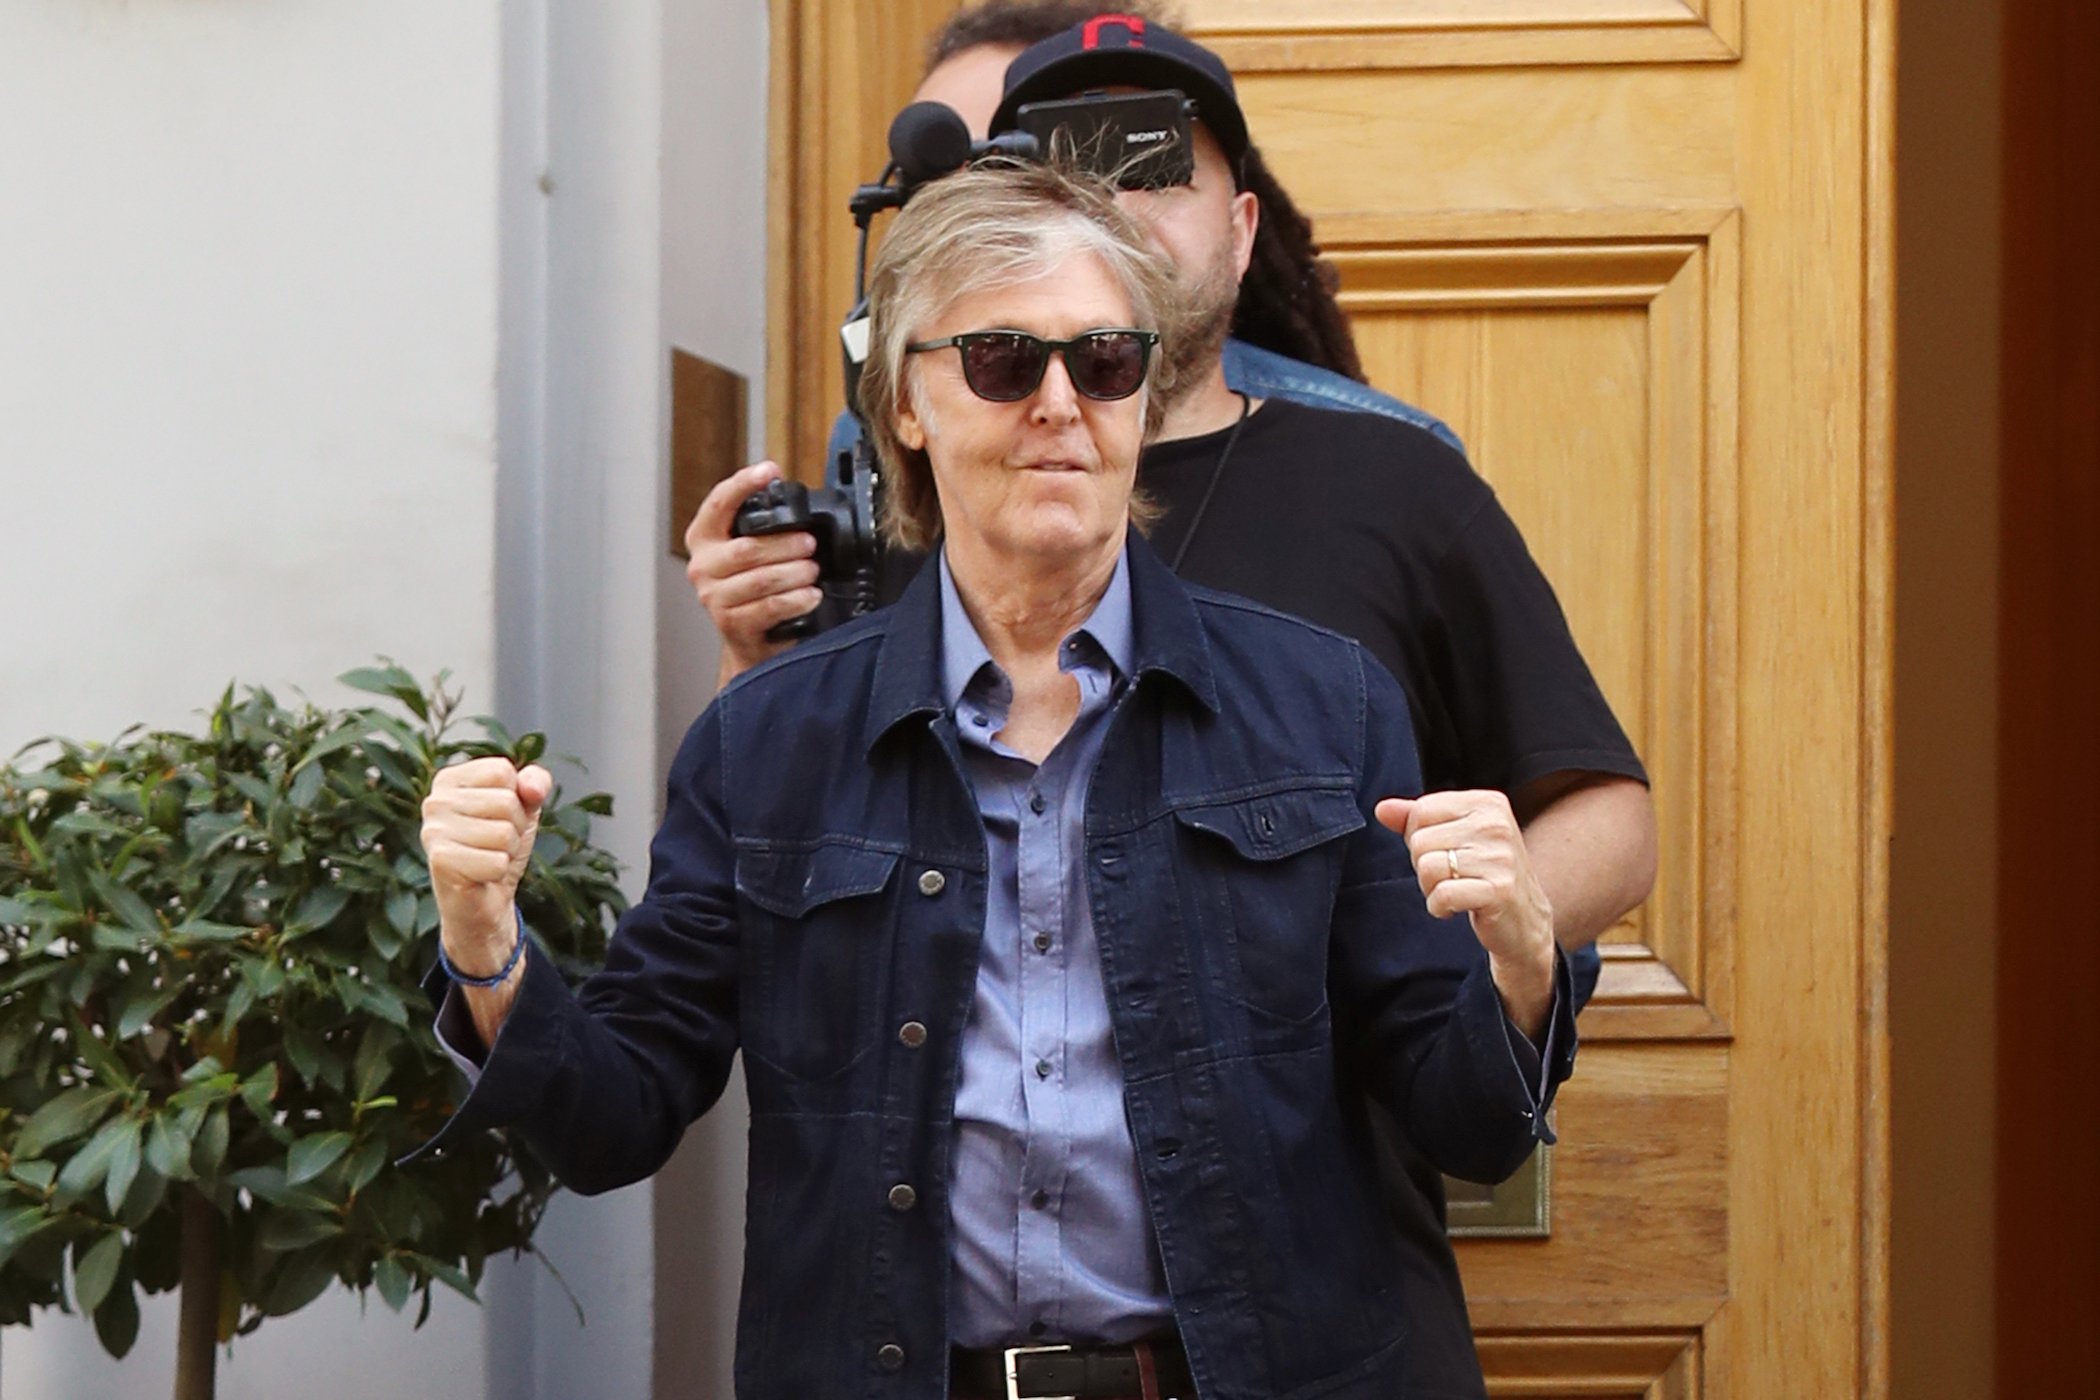 Paul McCartney spotted leaving Abbey Road Studios after performing a secret gig